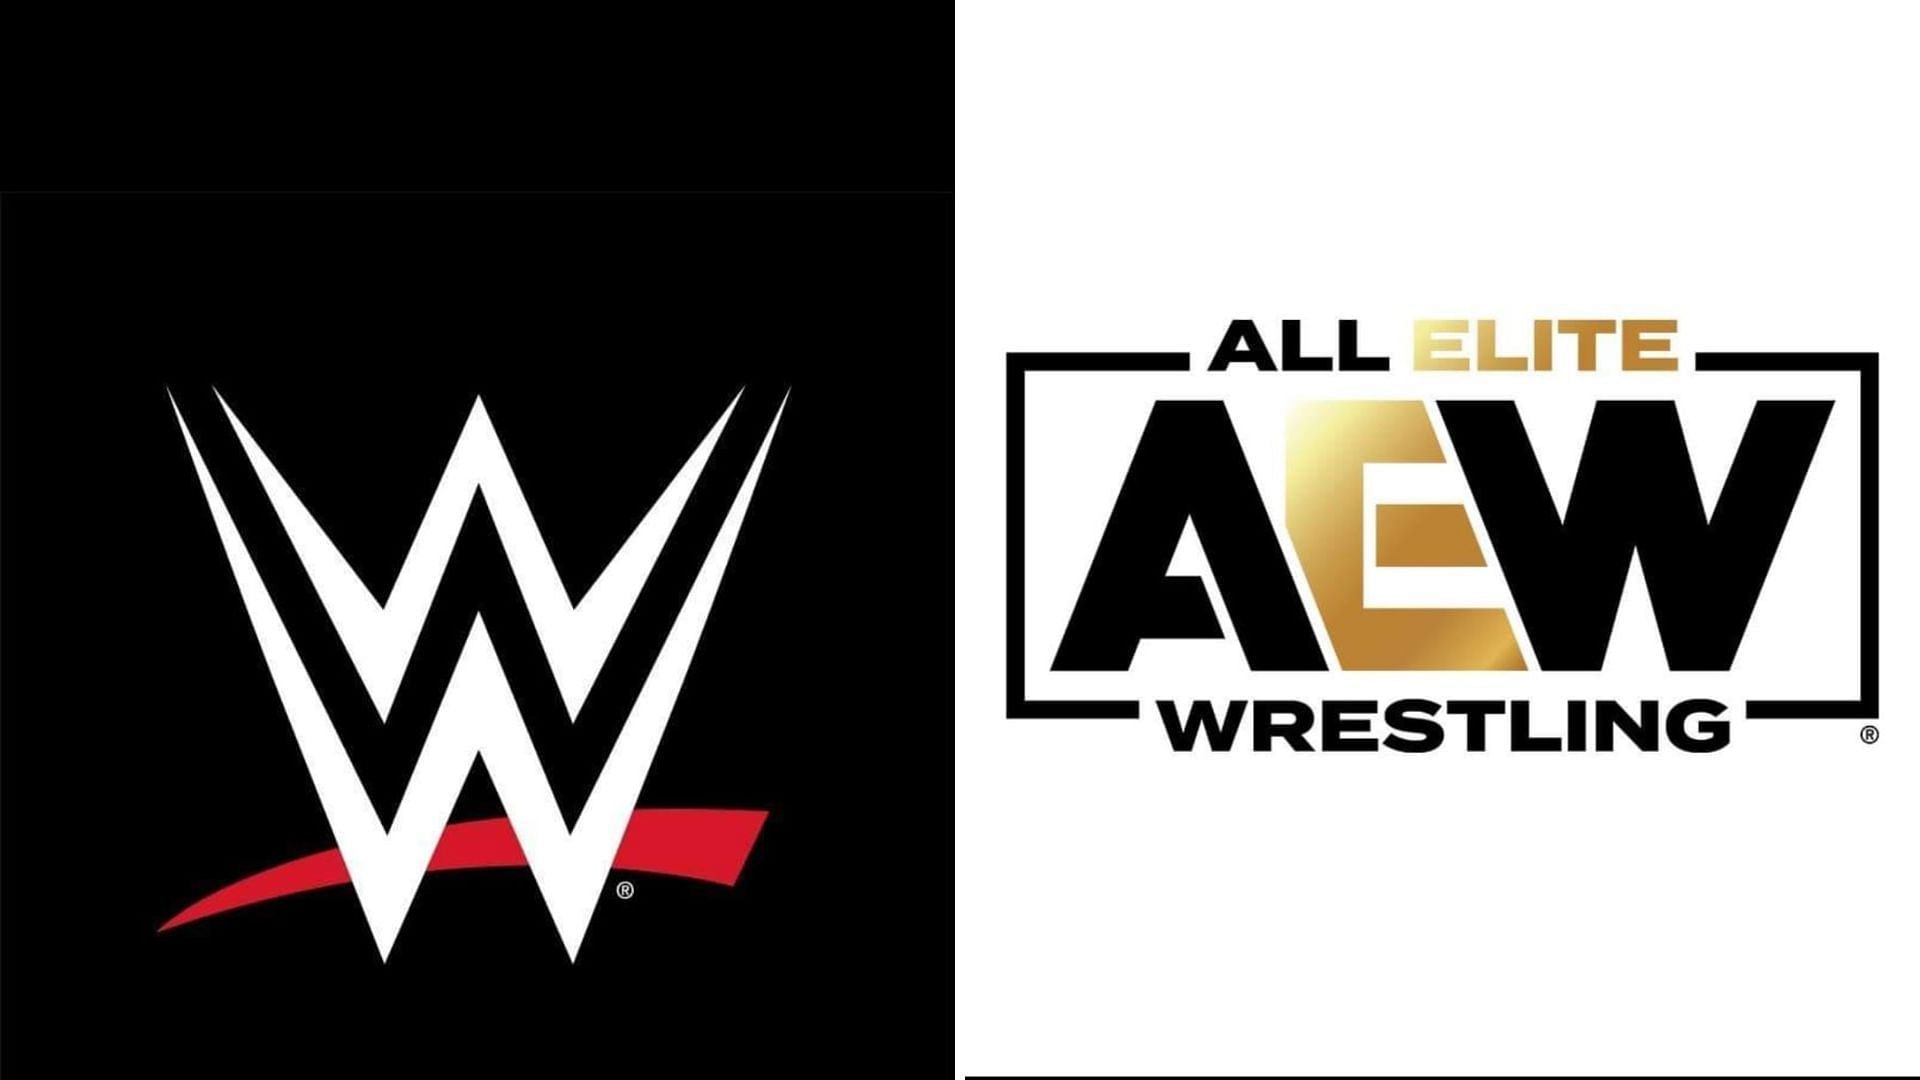 WWE and AEW are the homes to cutting-edge professional wrestling.